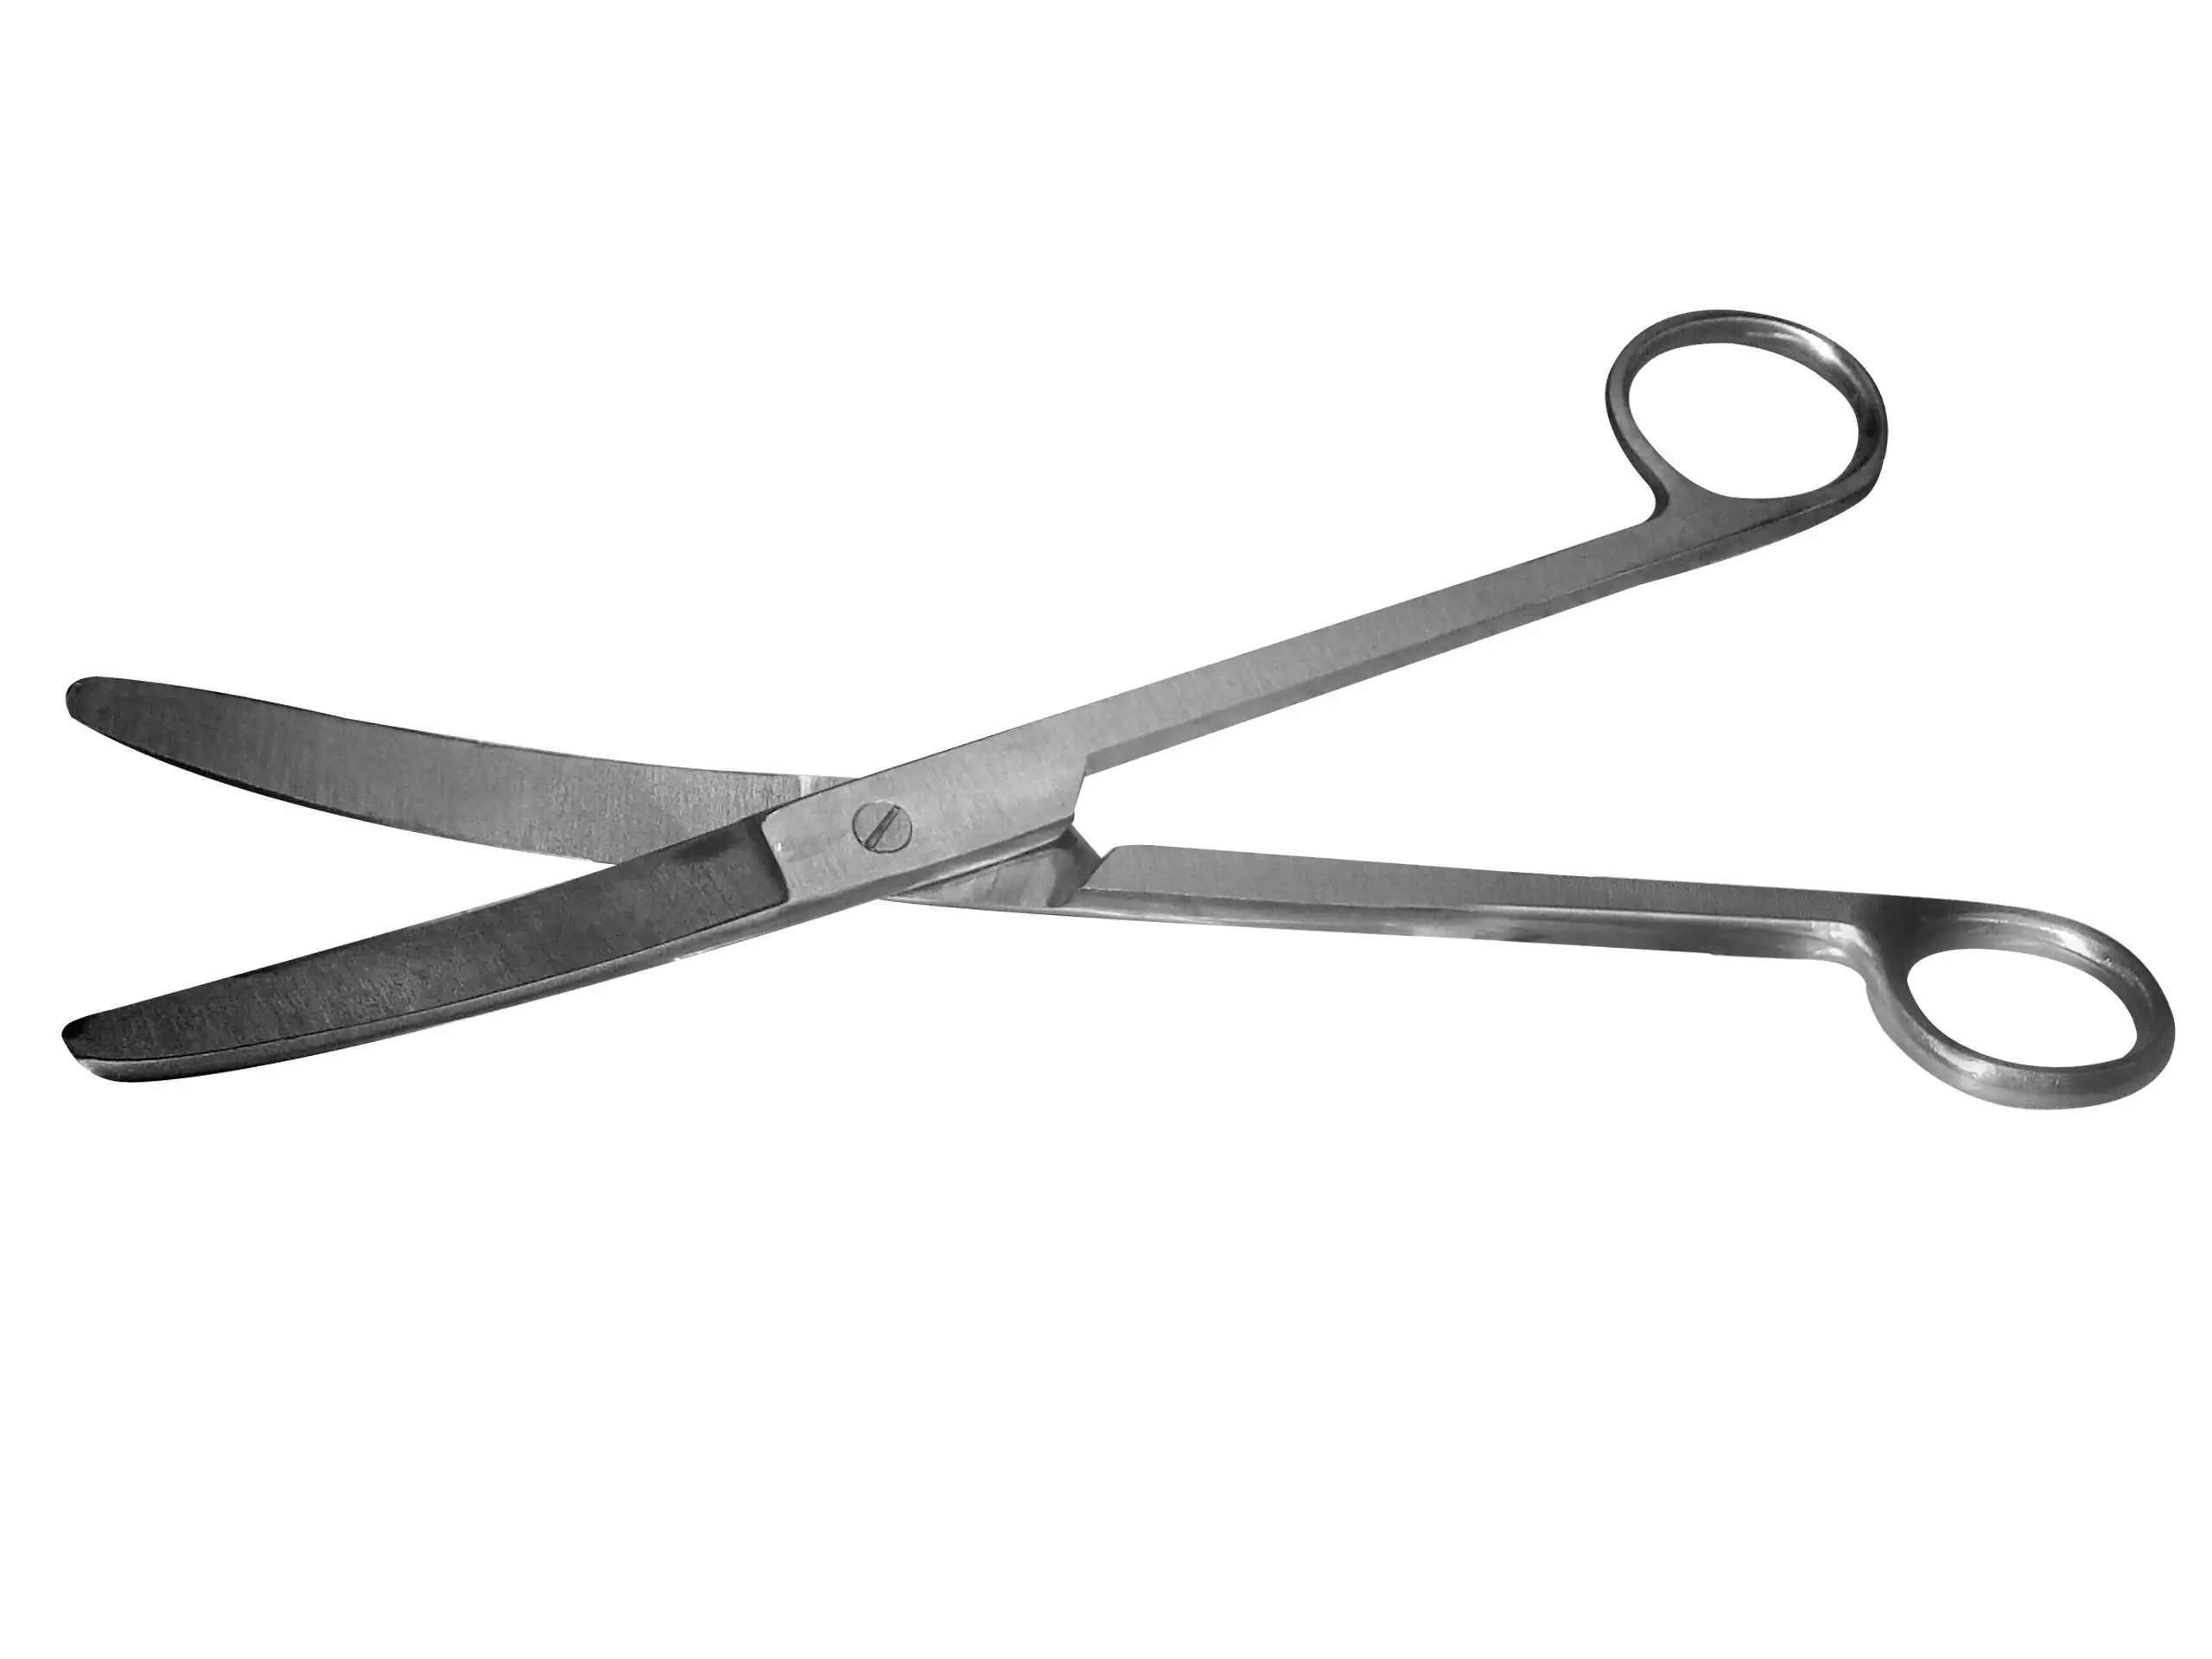 Livingstone Surgical Scissors 20cm Blunt/Blunt Curved Stainless Steel